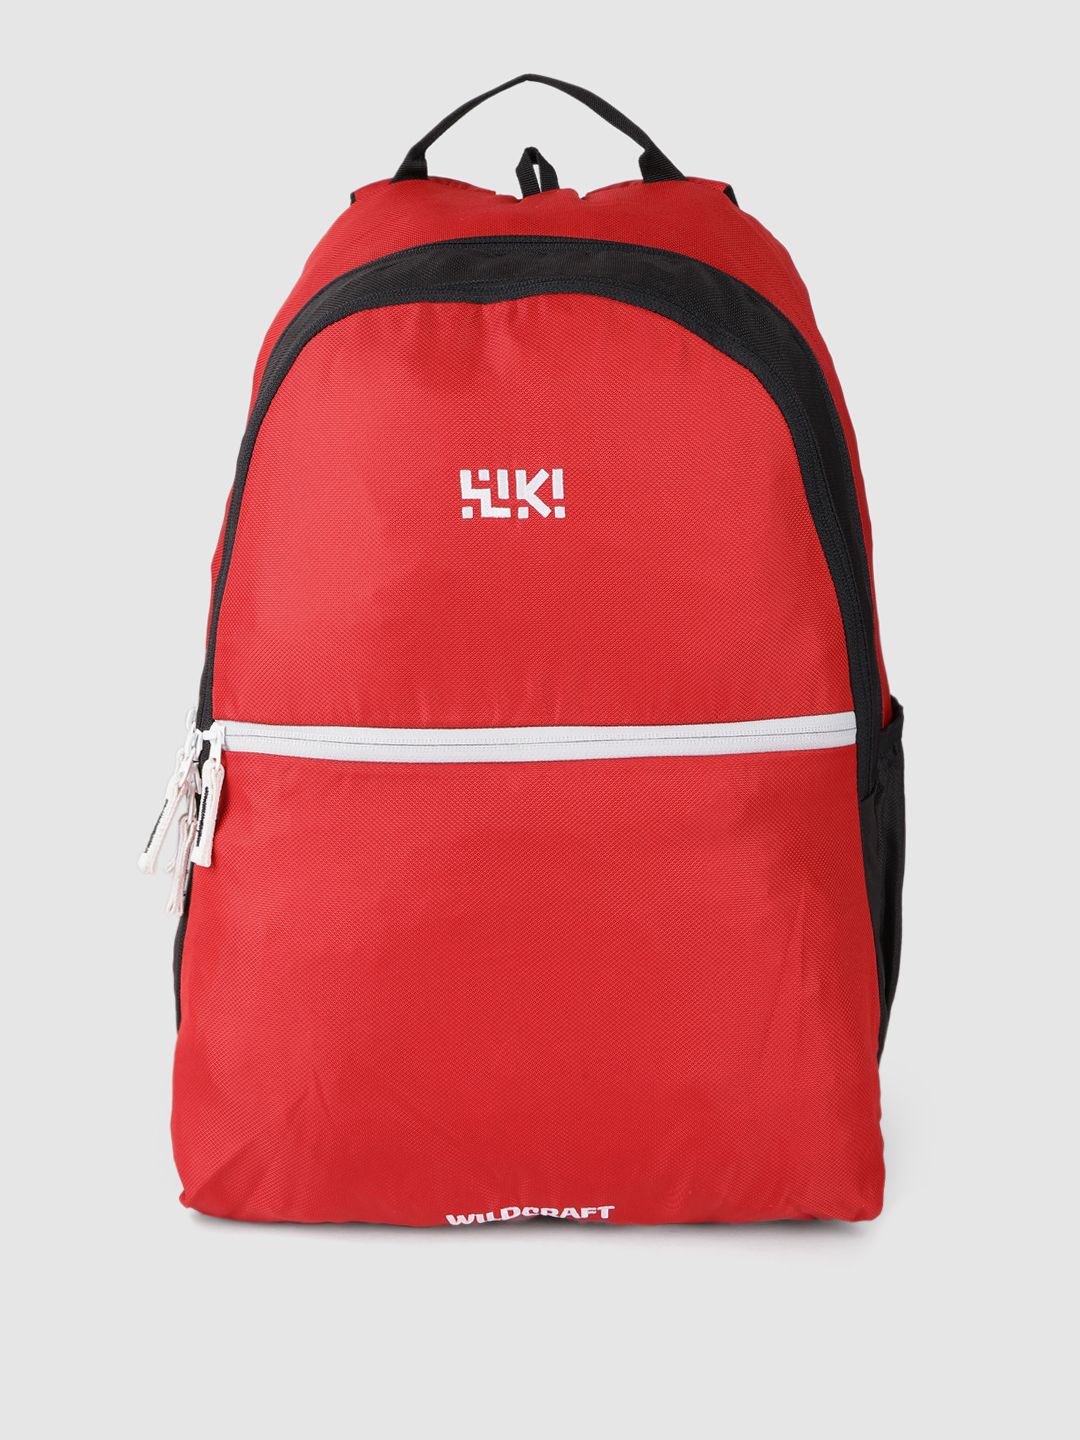 Wildcraft Unisex Red & Black Backpack Price in India